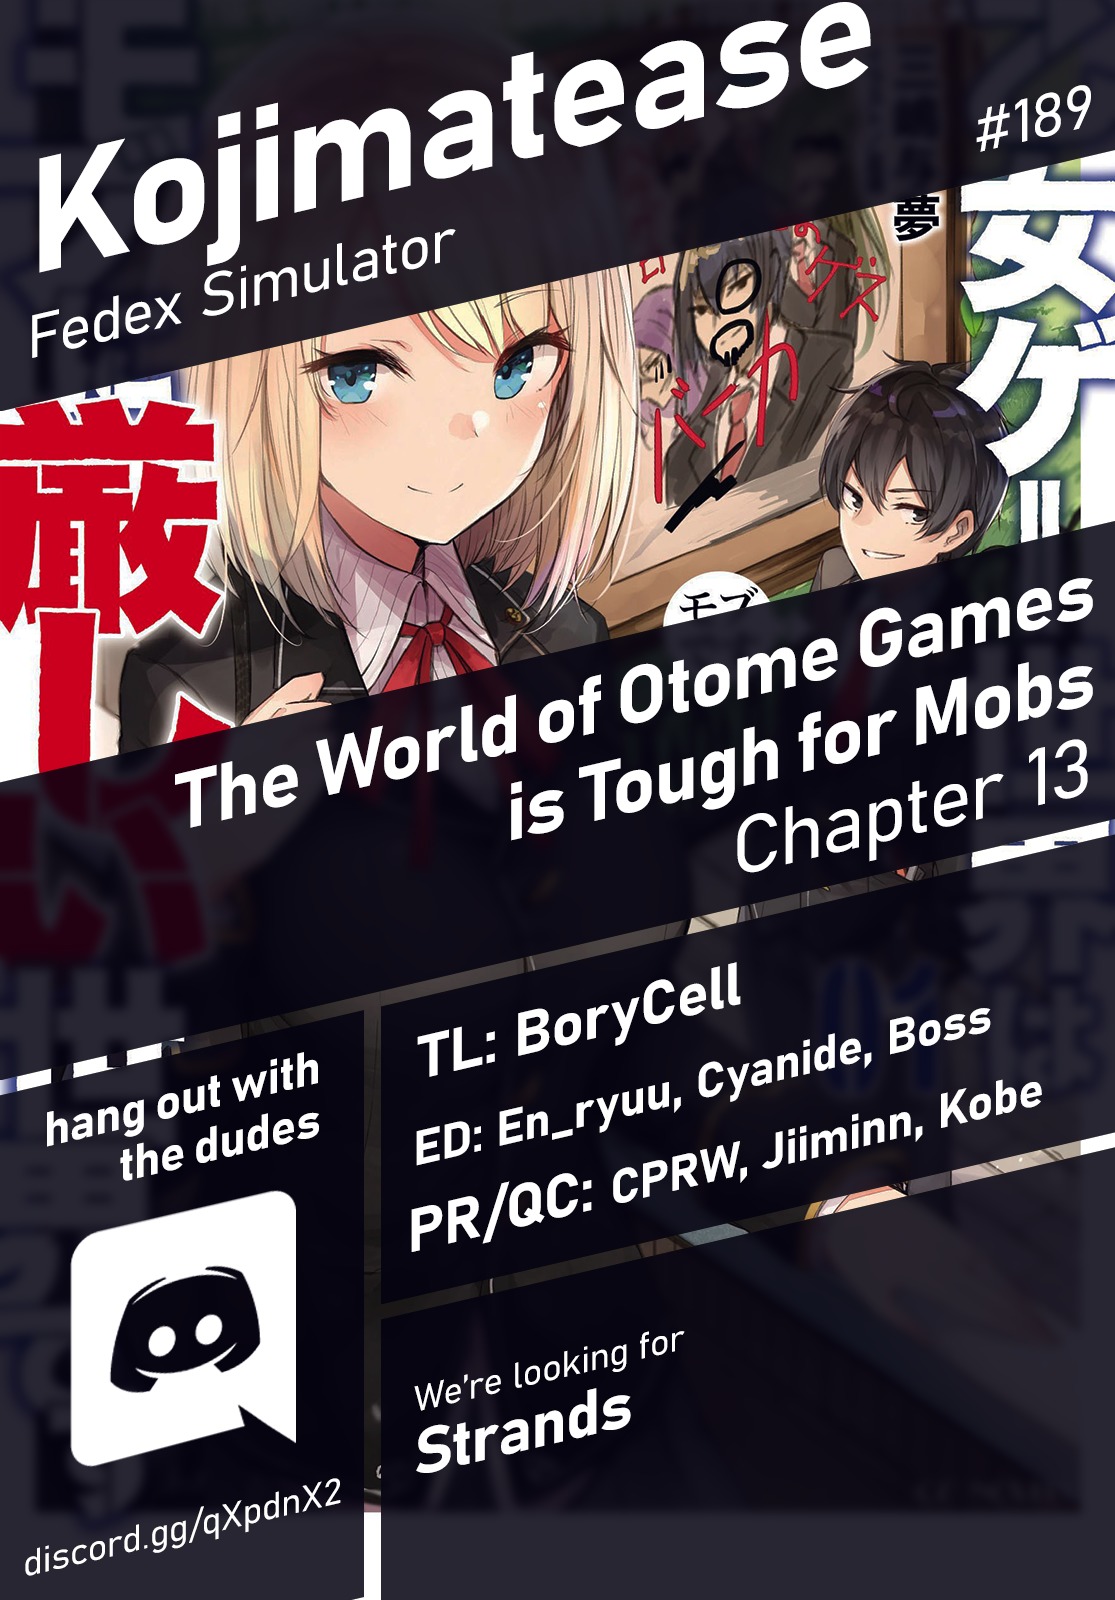 The World of Otome Games is Tough for Mobs ch.13